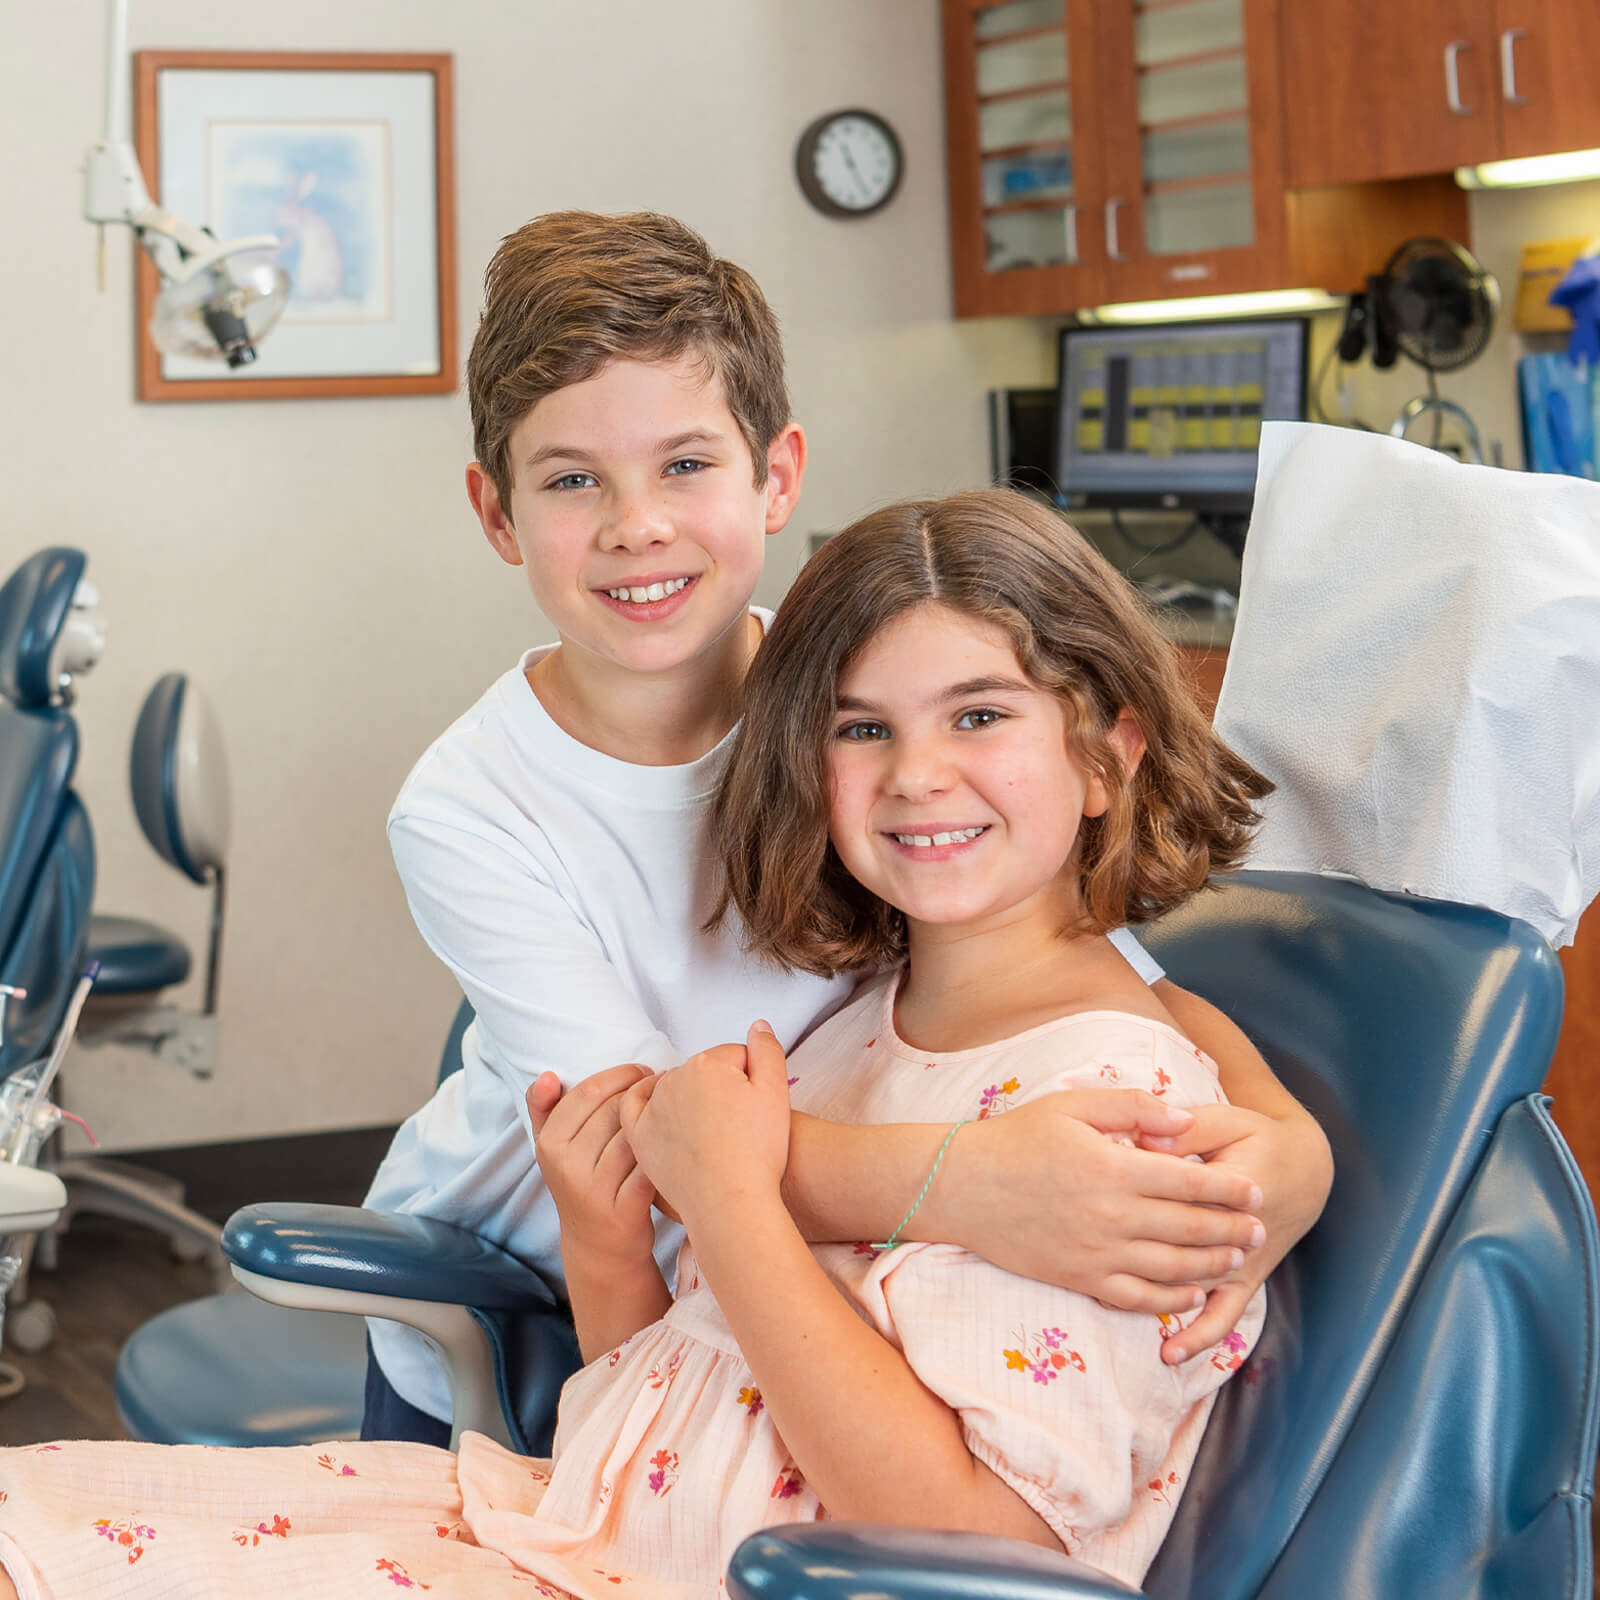 Brother hugging his sister who is sitting in a dentist chair